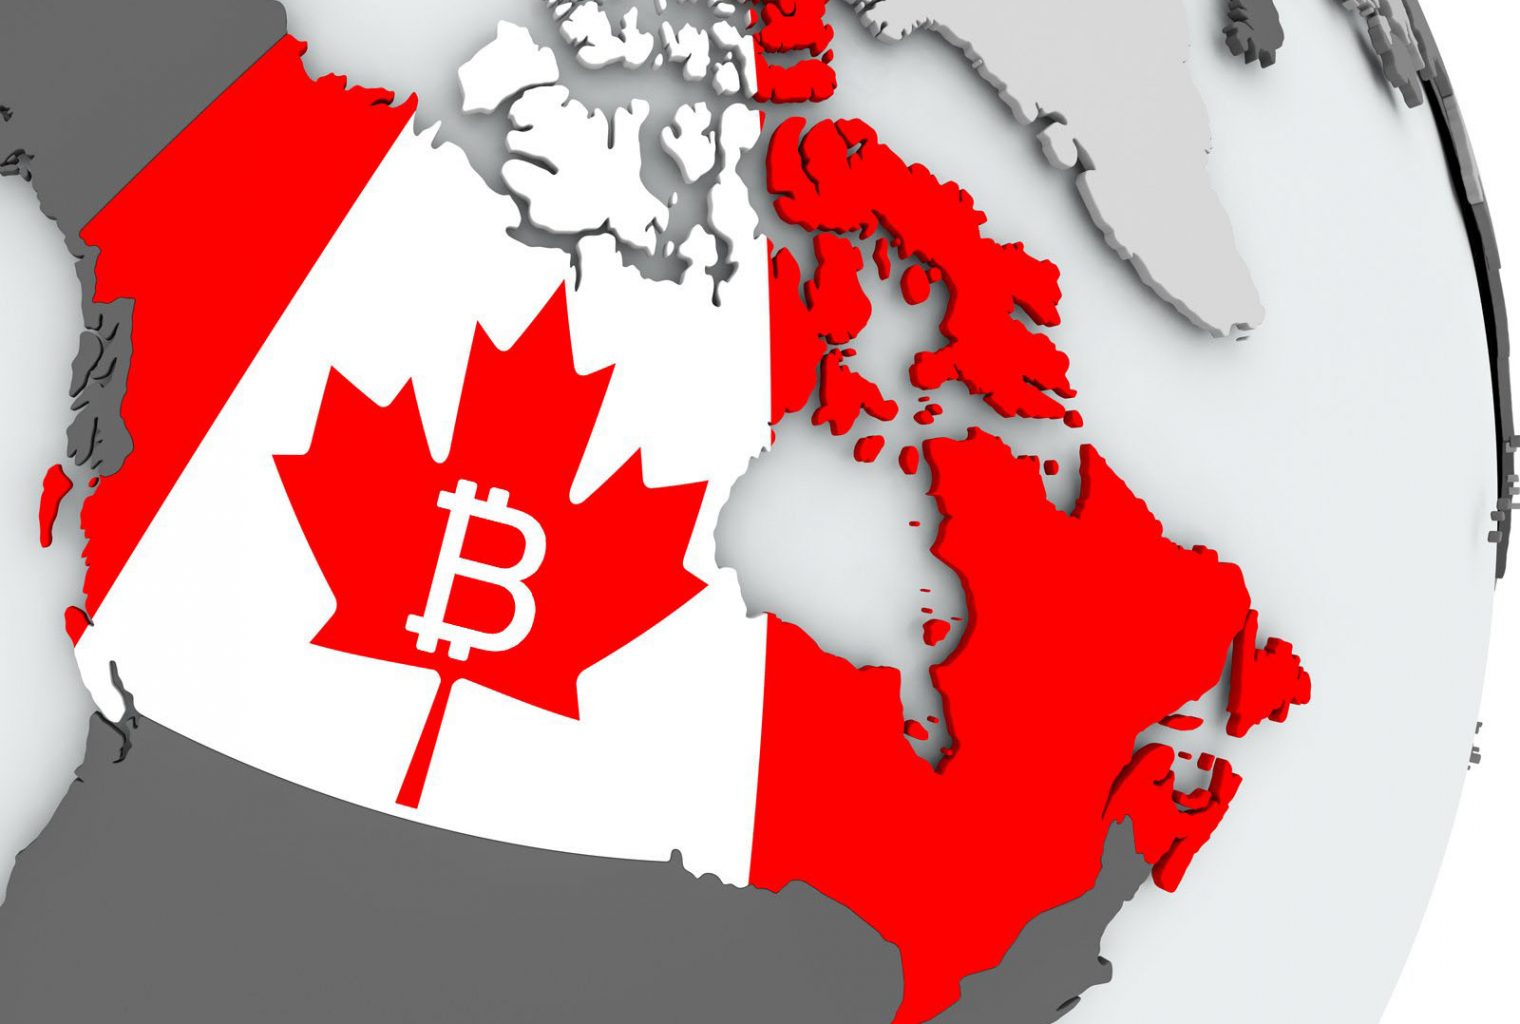 Toronto Firm Evolve Applies For Bitcoin Based Etf In Canada - 